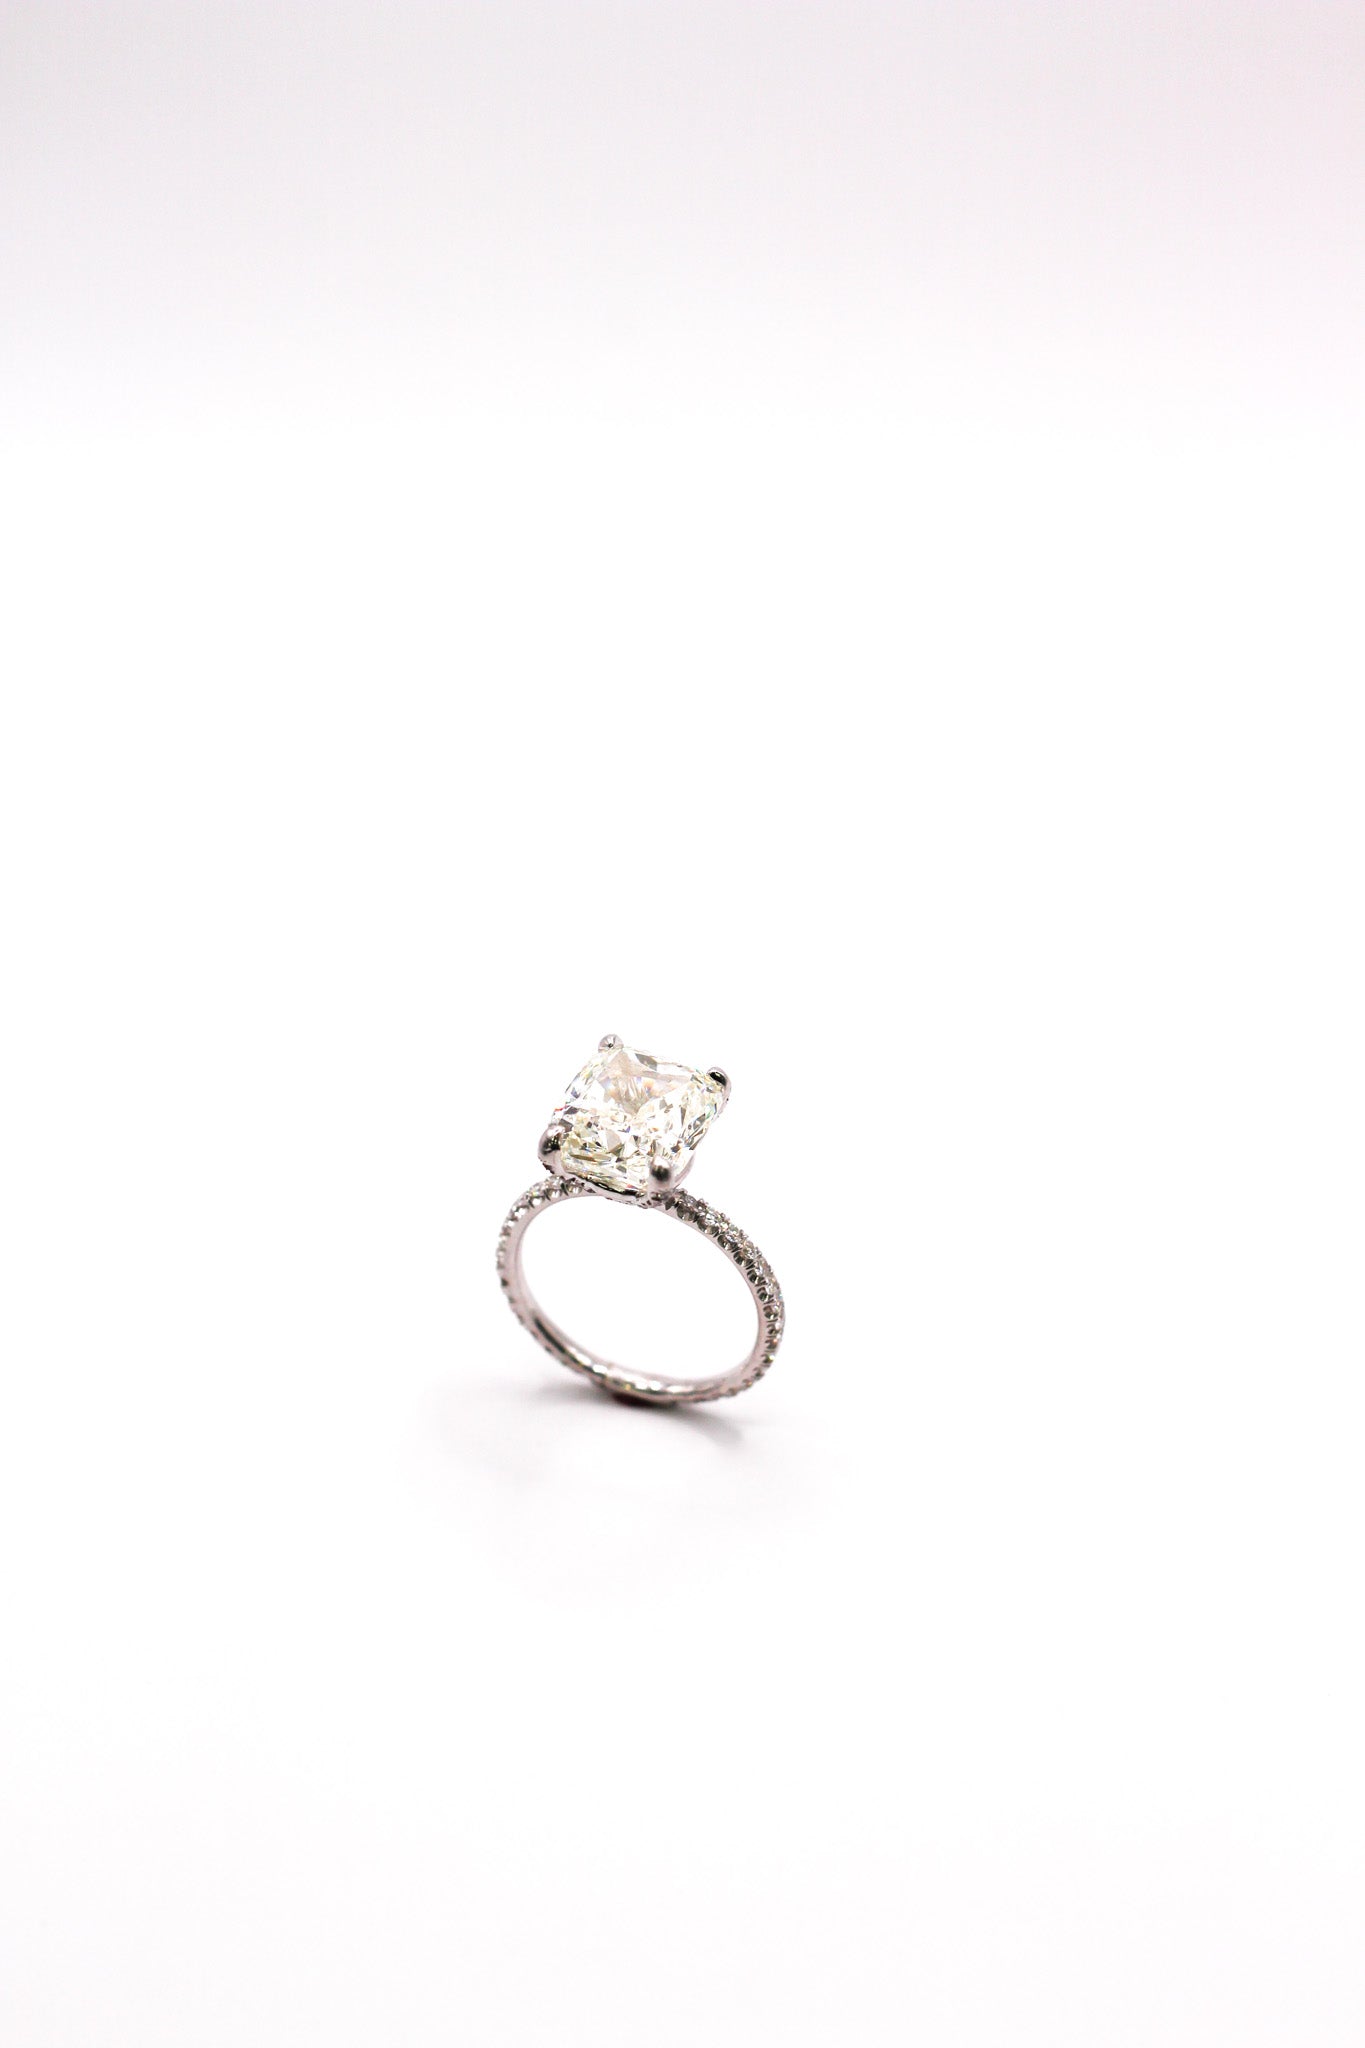 18KT White Gold Engagement Ring with Cushion Cut and Round Diamonds